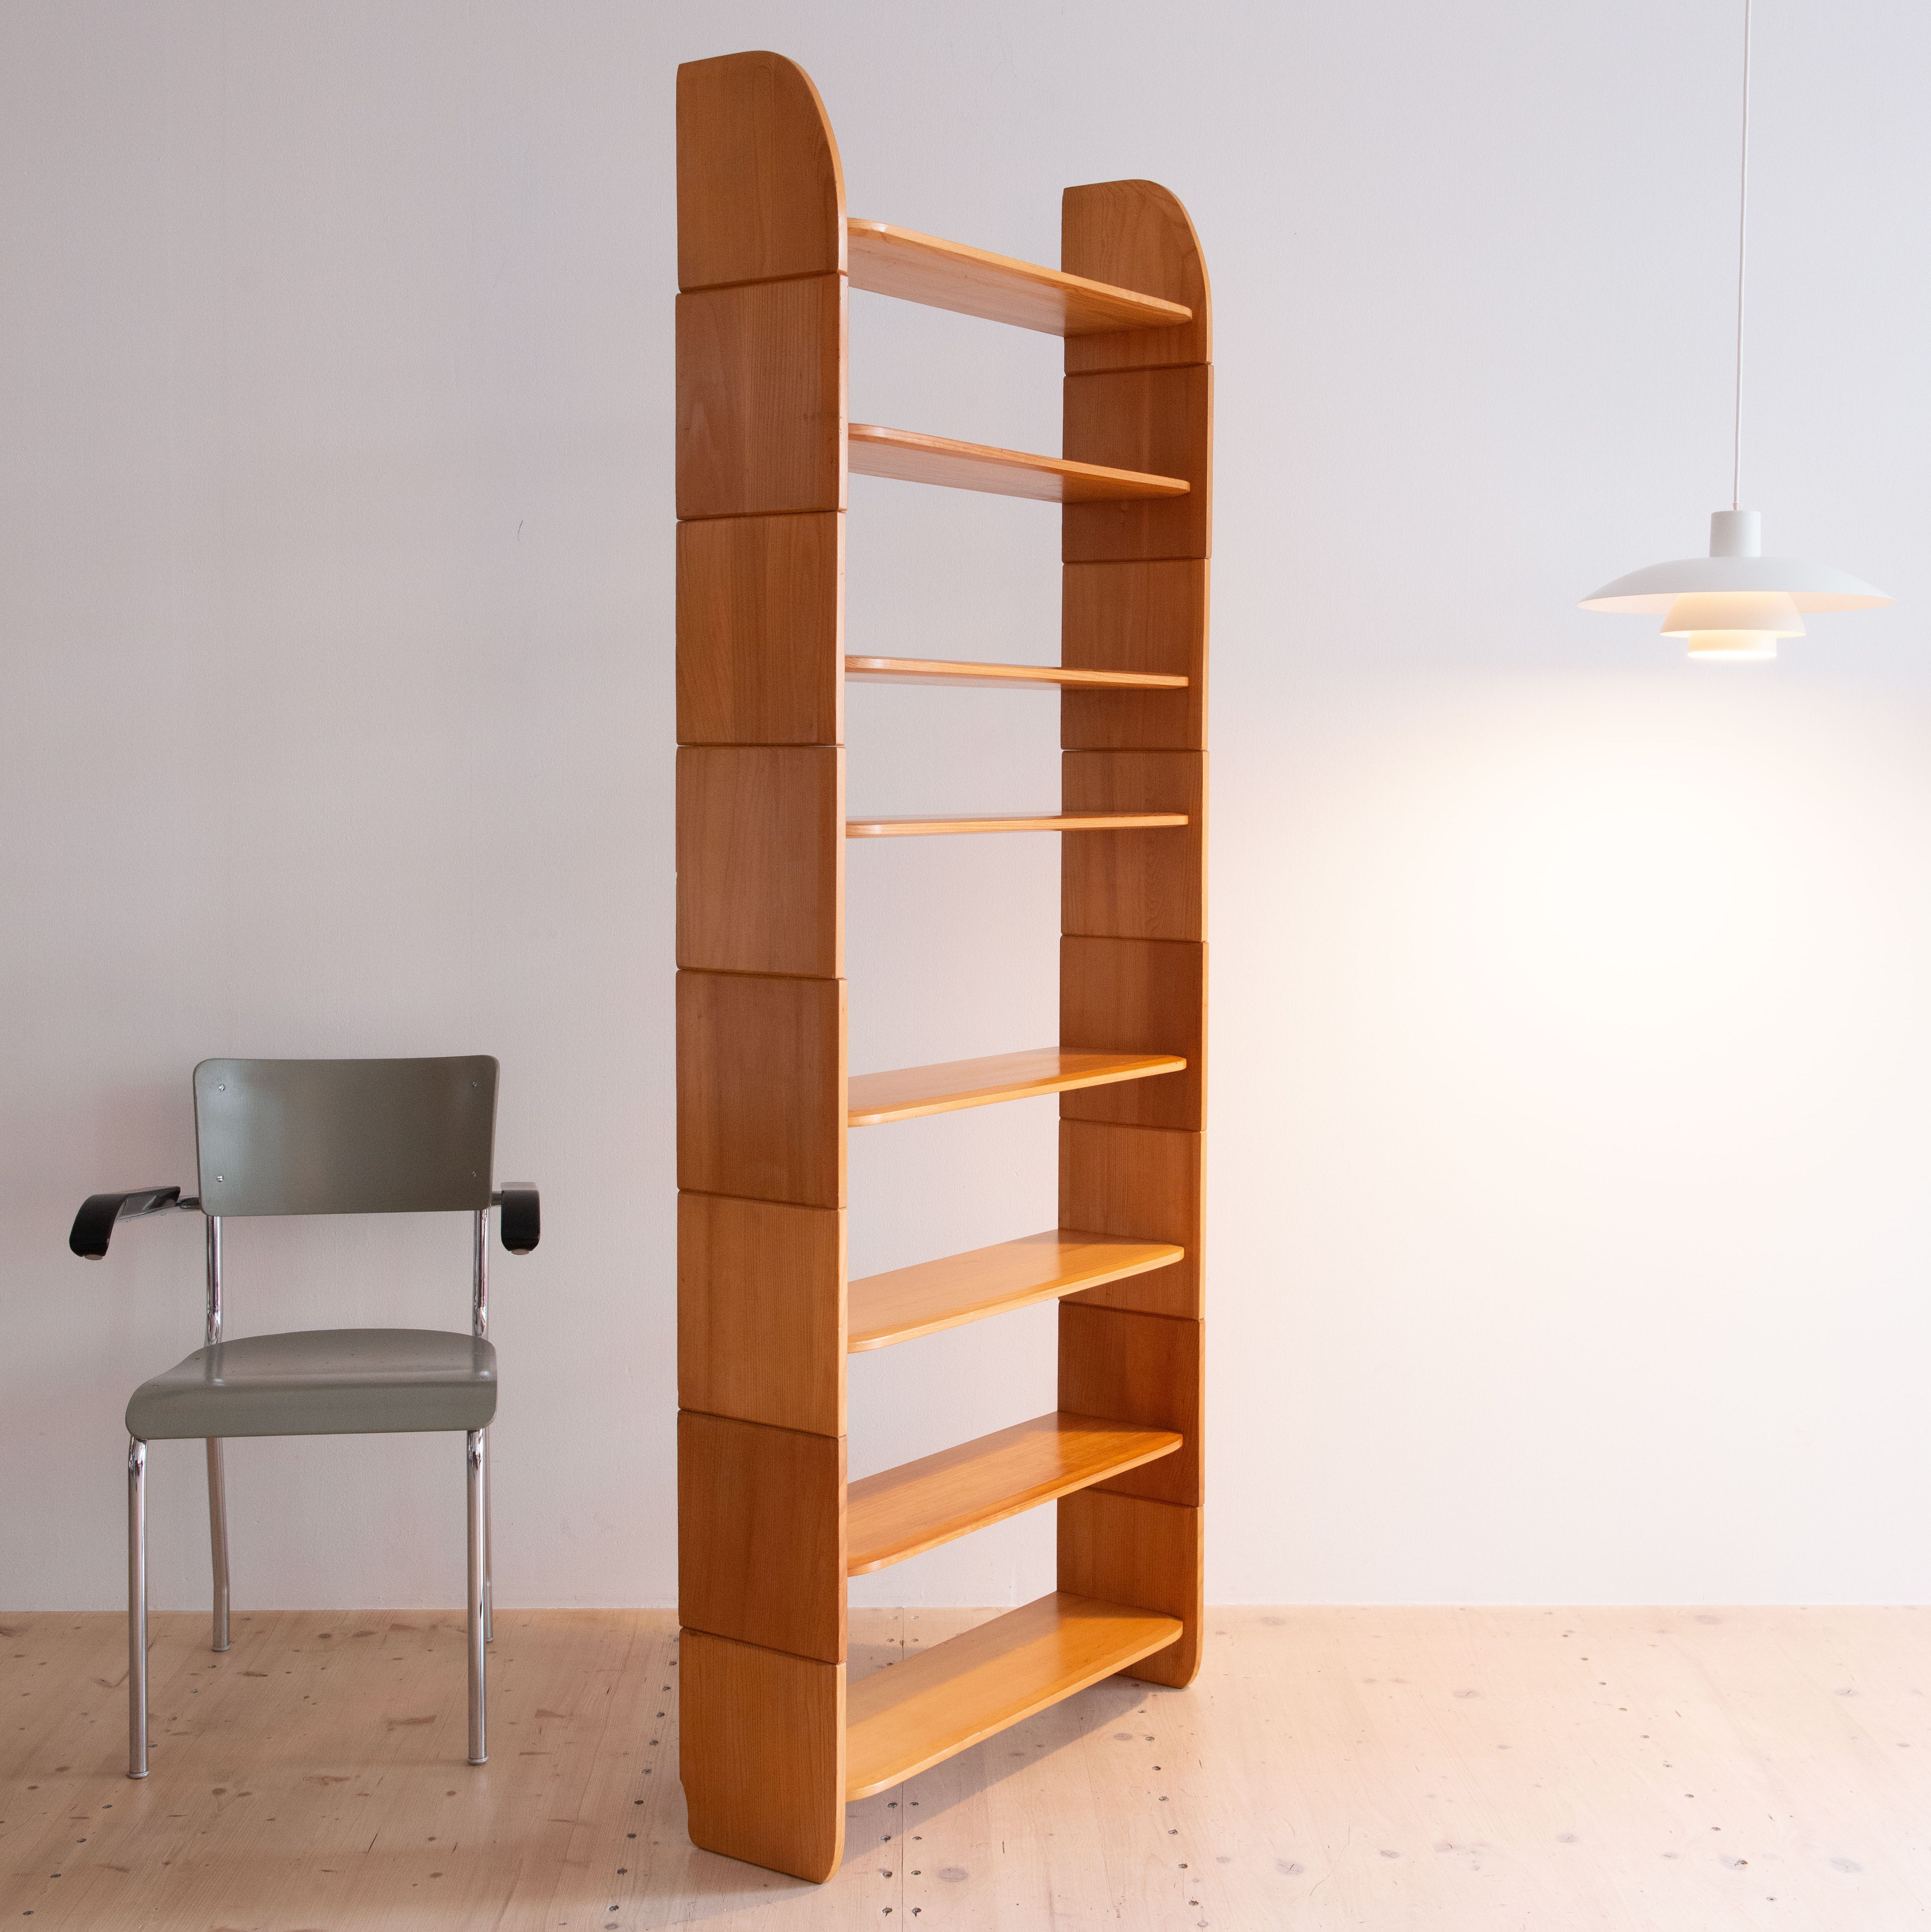 Pine Stackable Shelves produced by Arthur Milani for Wohnhilfe, Switzerland in the 1940s. Available at heyday möbel, Grubenstrasse 19, 8045 Zürich.